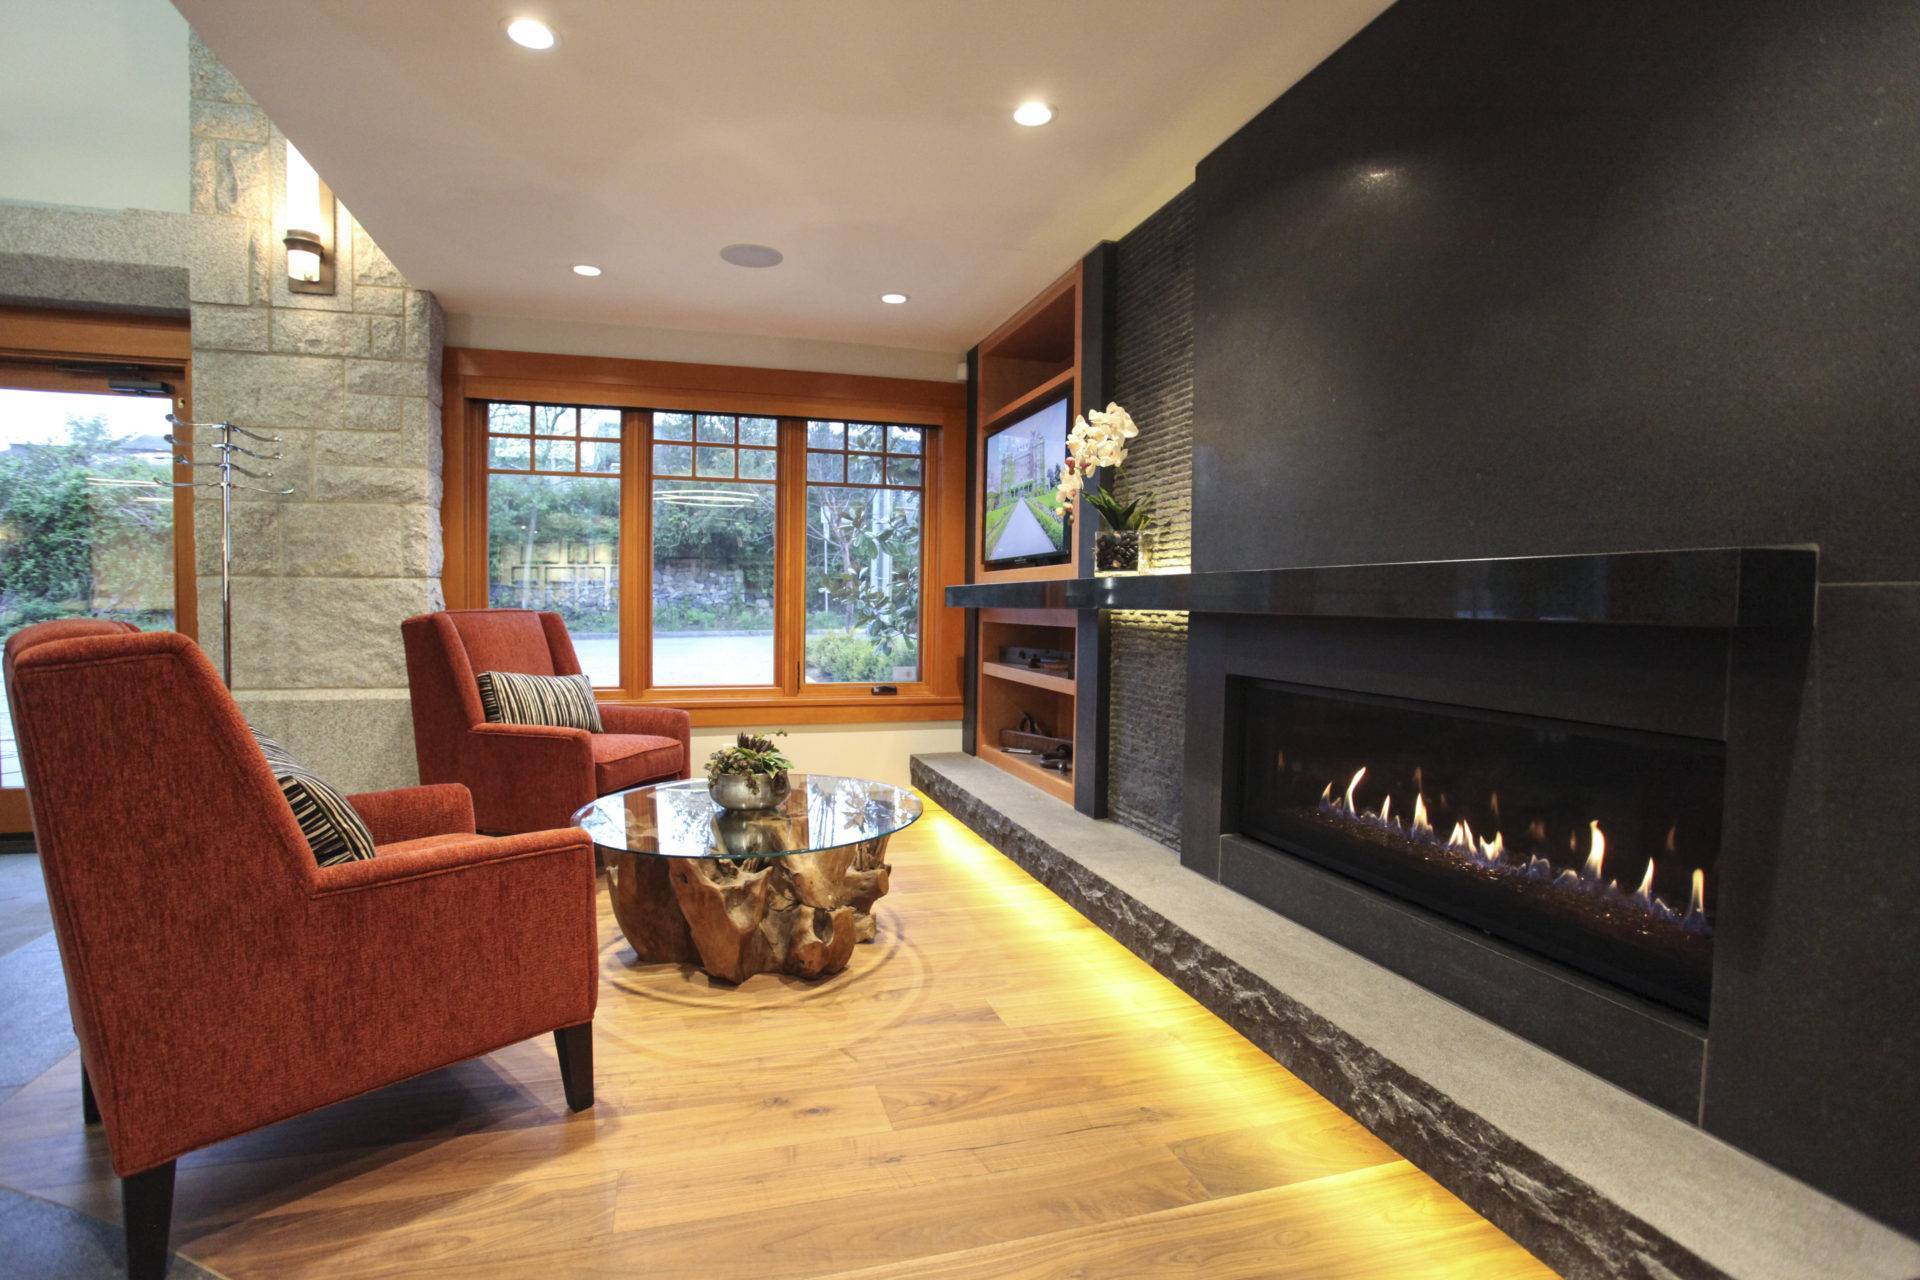 Lobby seating with large windows and long gas fireplace